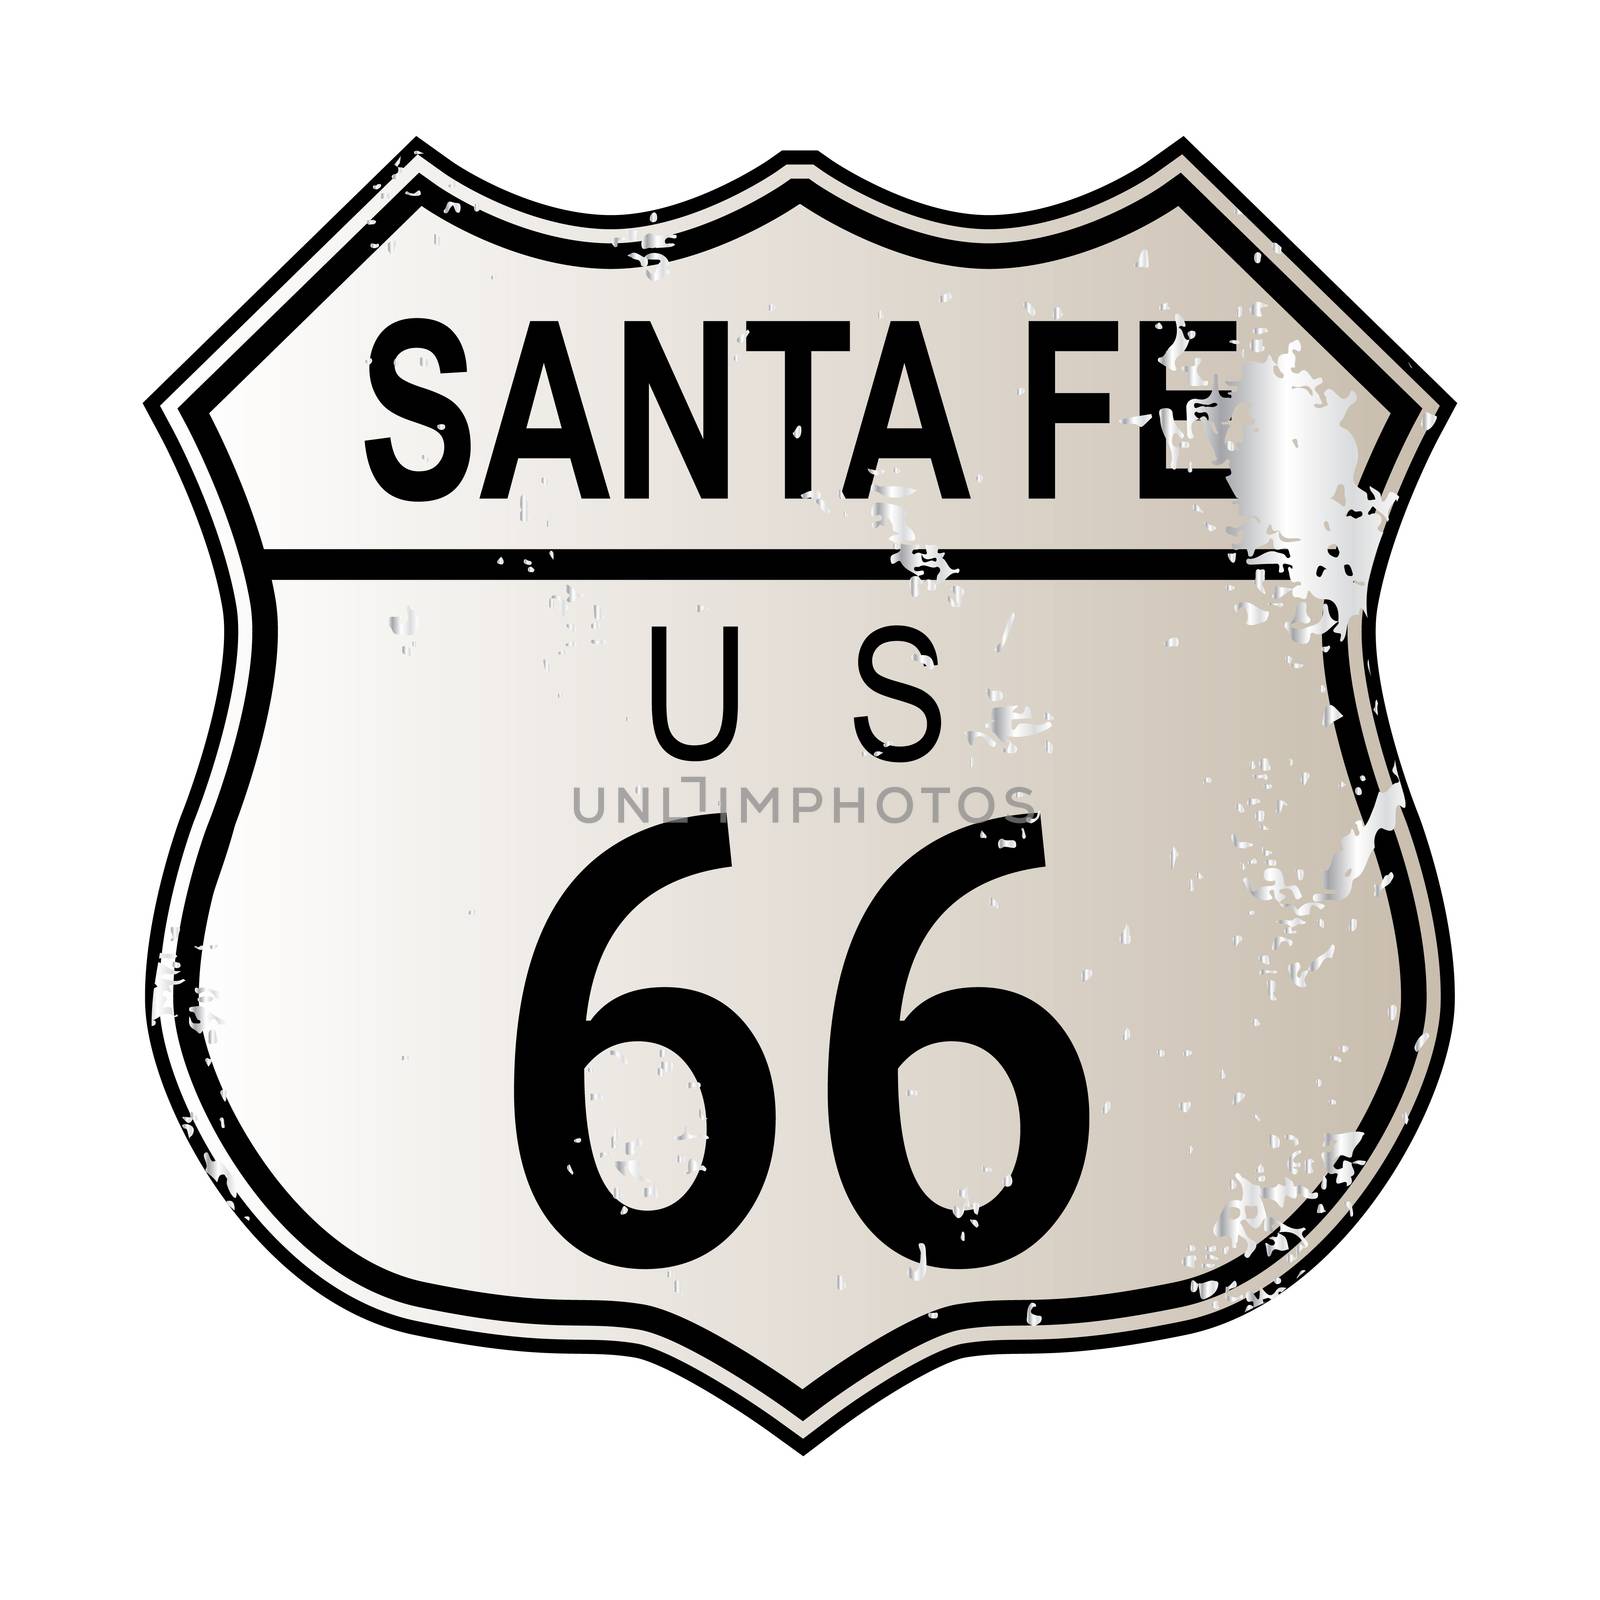 Santa Fe Route 66 Highway Sign by Bigalbaloo